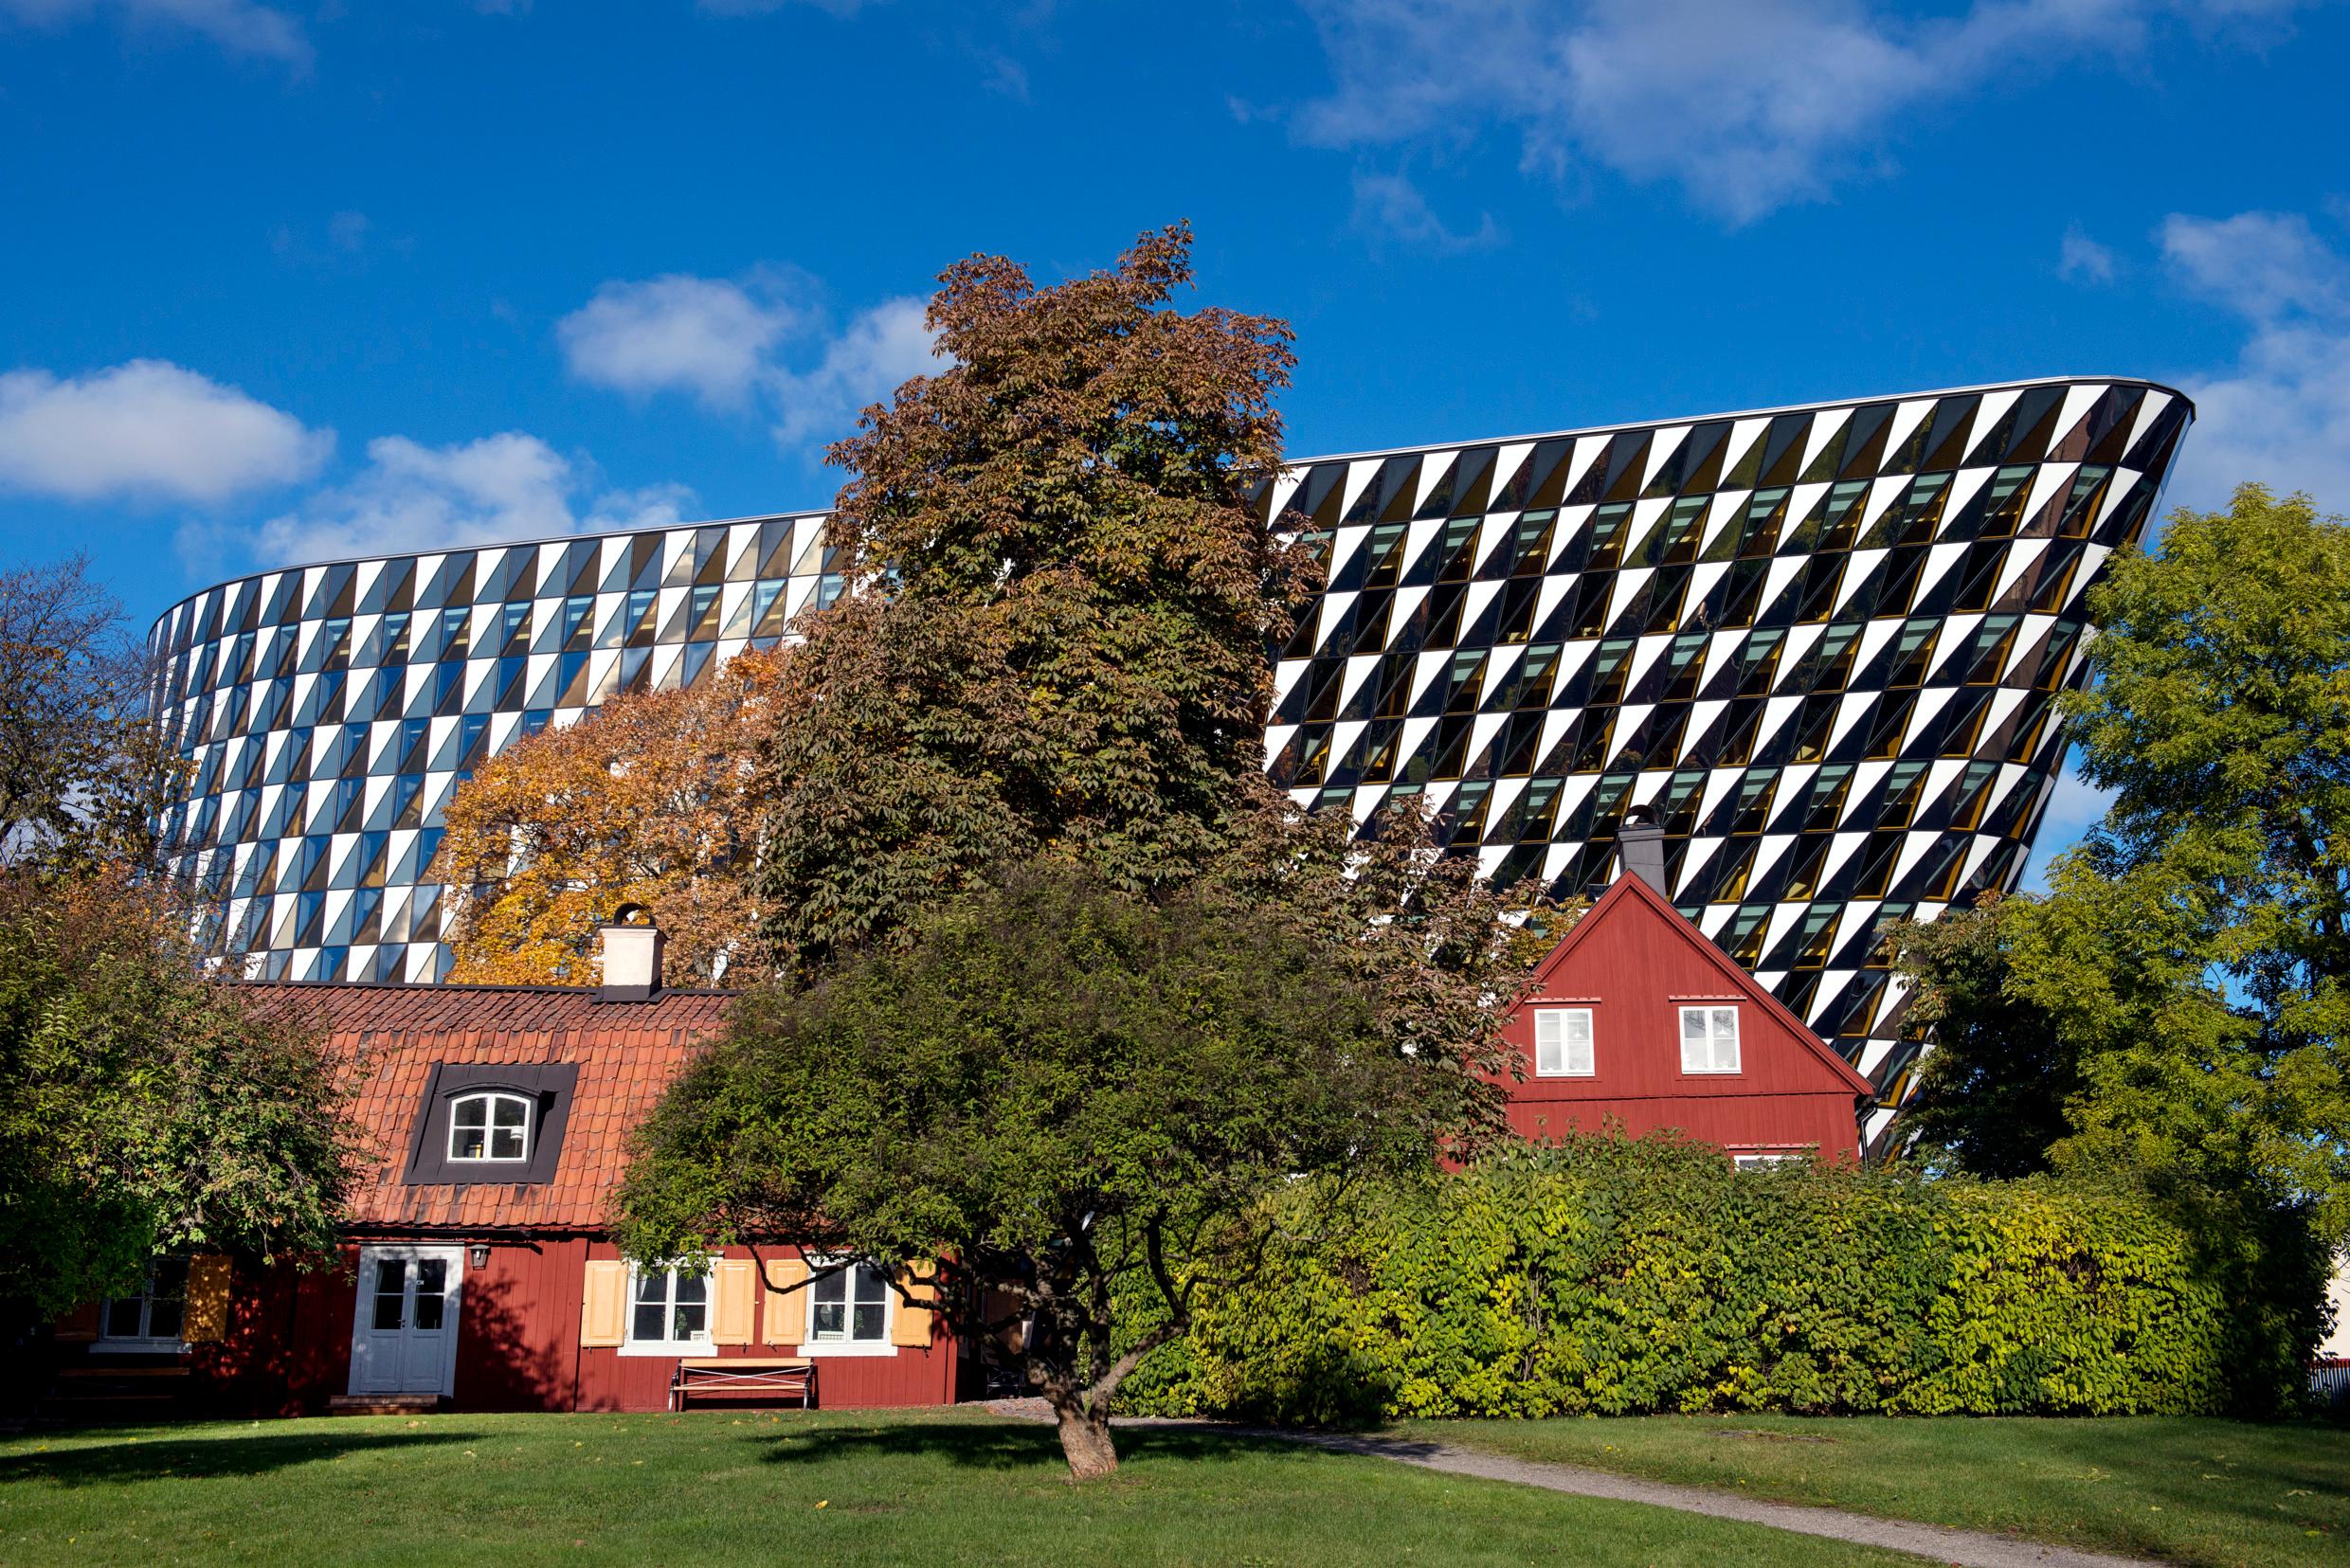 A supermodern geometrical building behind traditional Swedish red wooden houses in a park with green grass and trees, blue sky in the background.